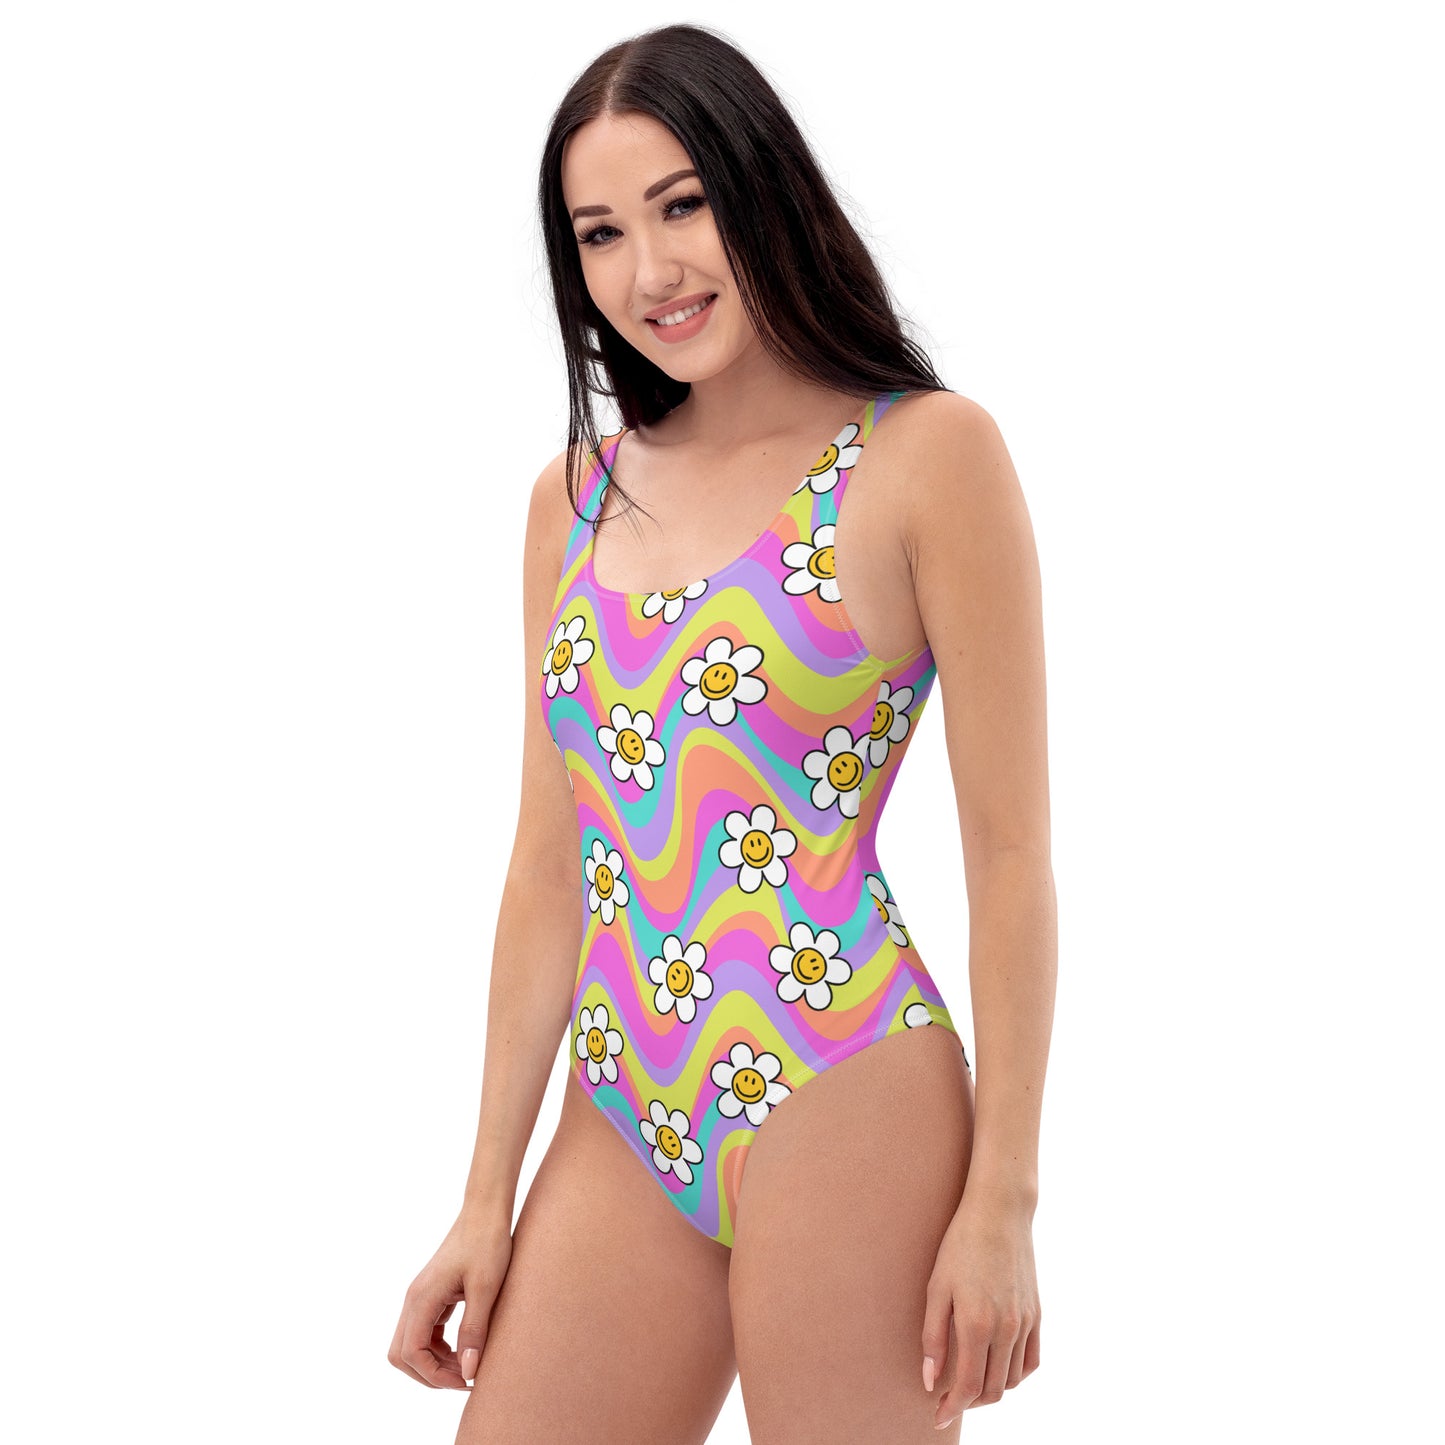 Groovy Rave Bodysuit, Plus size rave outfit